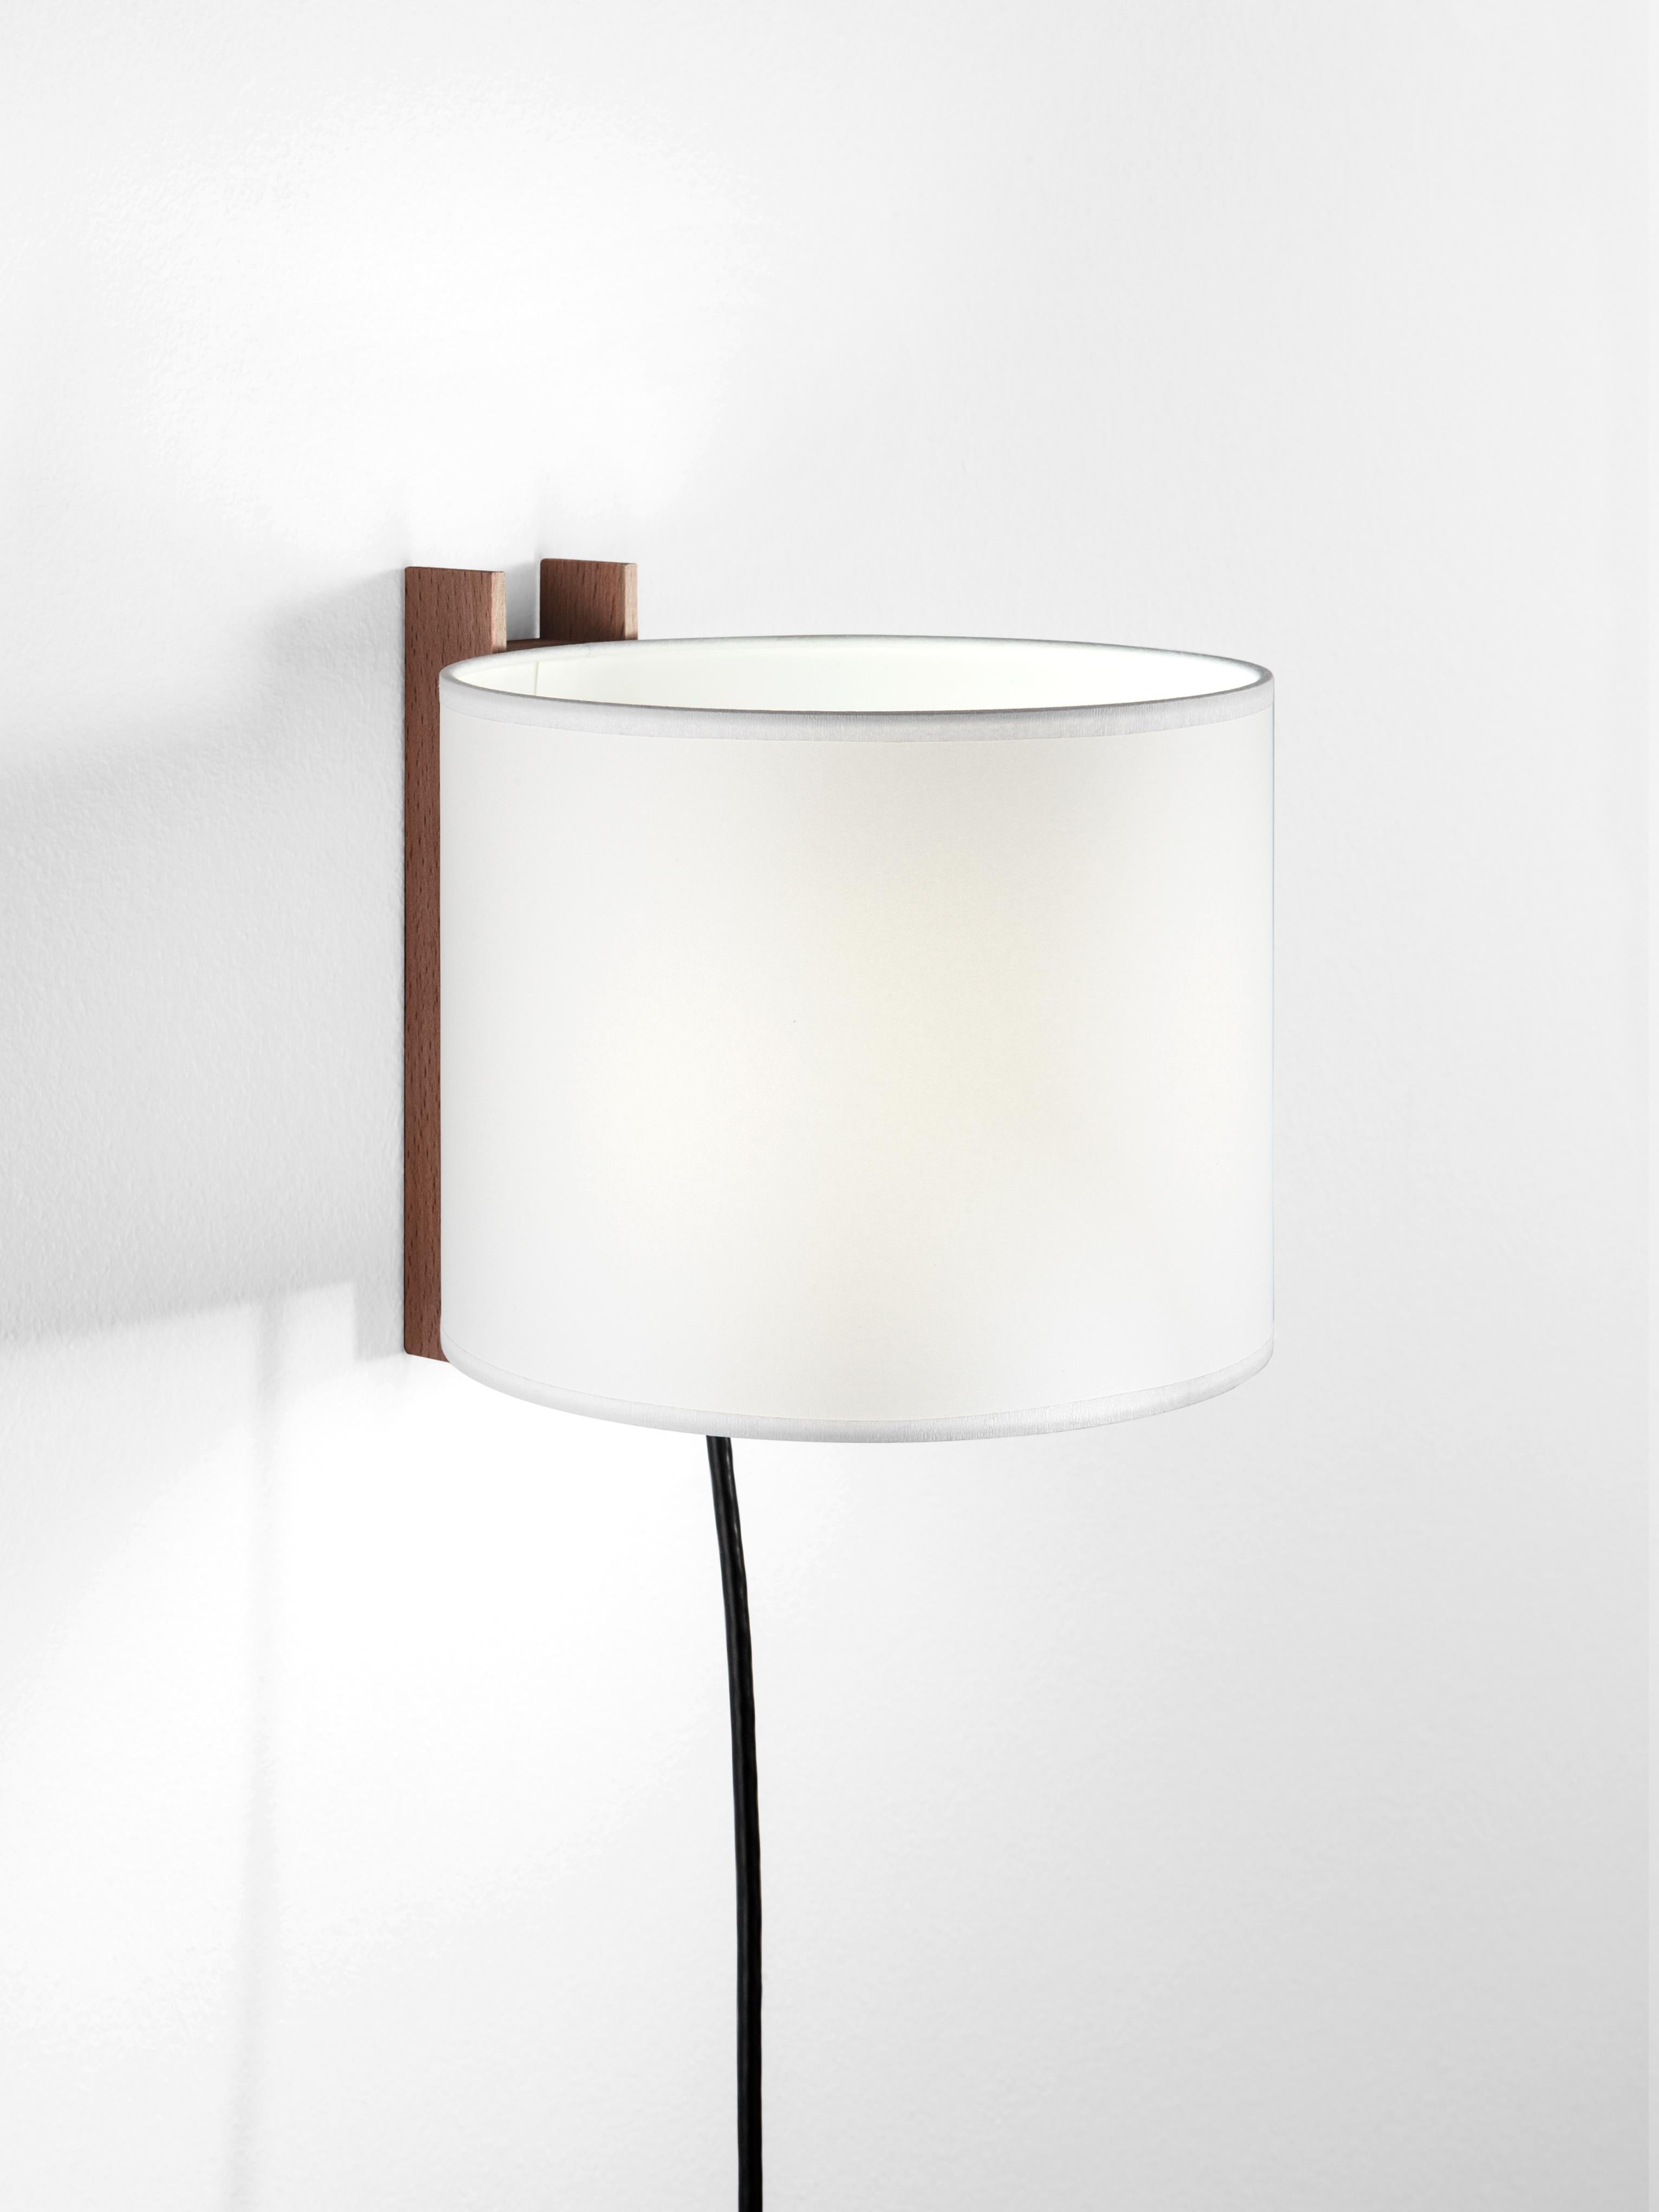 White and Walnut TMM Corto wall lamp by Miguel Milá
Dimensions: D 20 x W 23 x H 20 cm
Materials: Metal, walnut wood, parchment lampshade.
With plug.
Available in beech or walnut and in white or beige lampshade.
Available with plug or direct